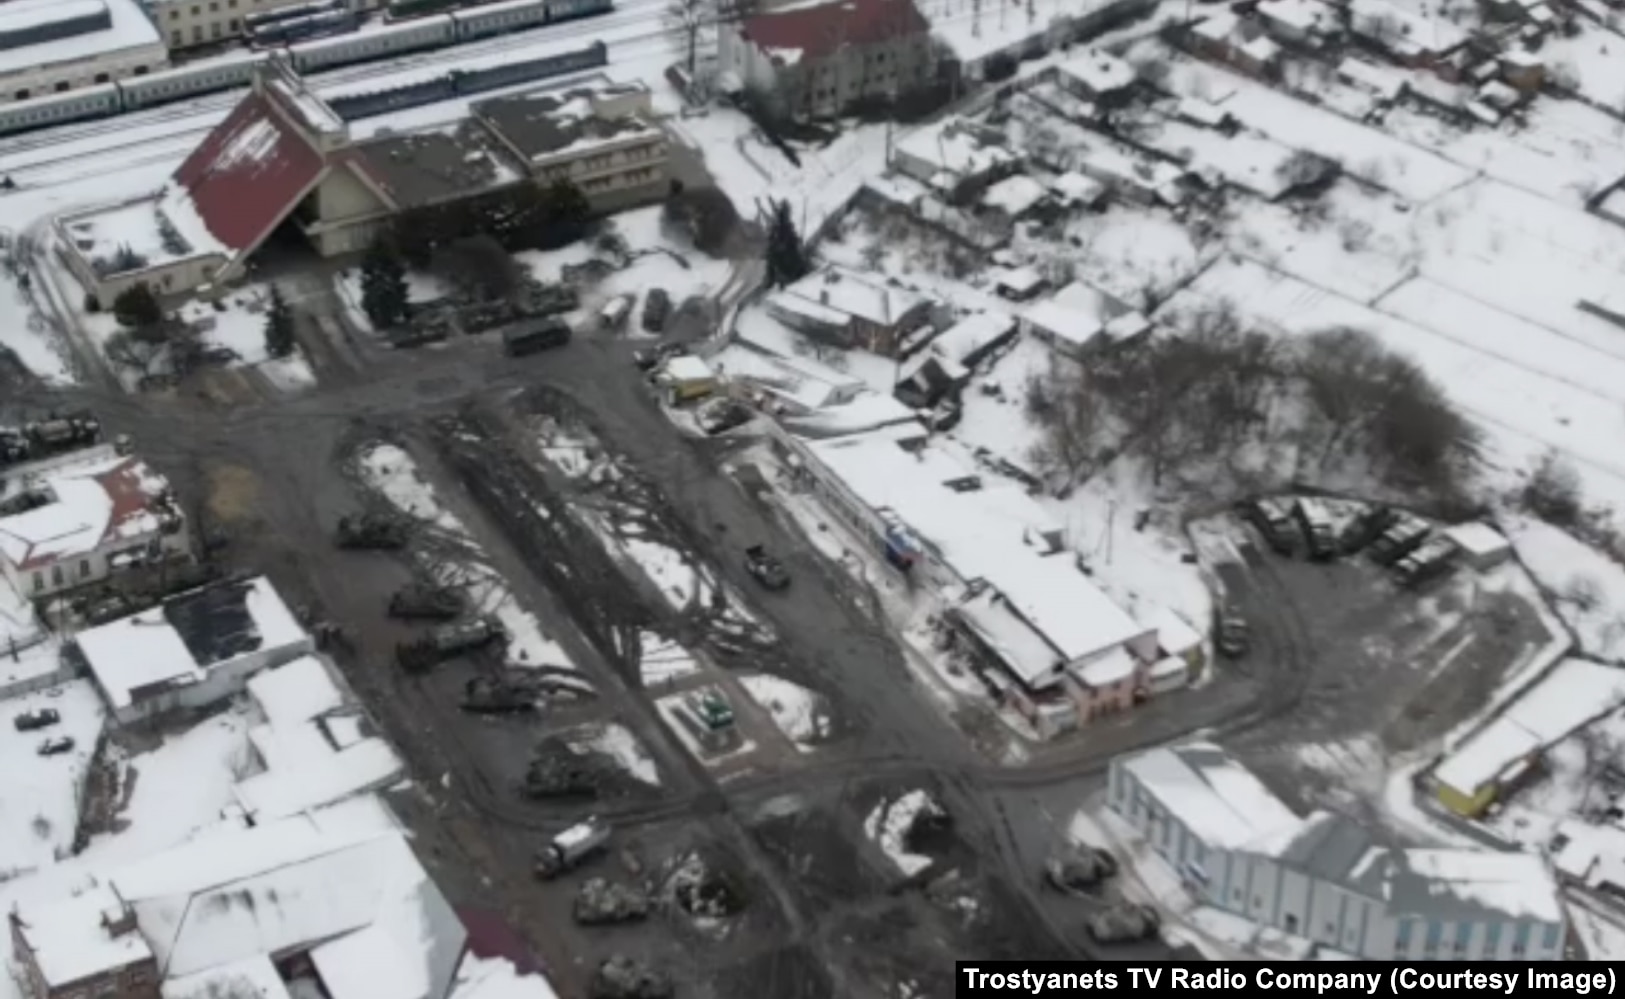 A drone image showing around two dozen Russian vehicles around the square in front of Trostyanets’s train station during the 2022 occupation. The T-34 tank monument can be seen near the center of this photo.